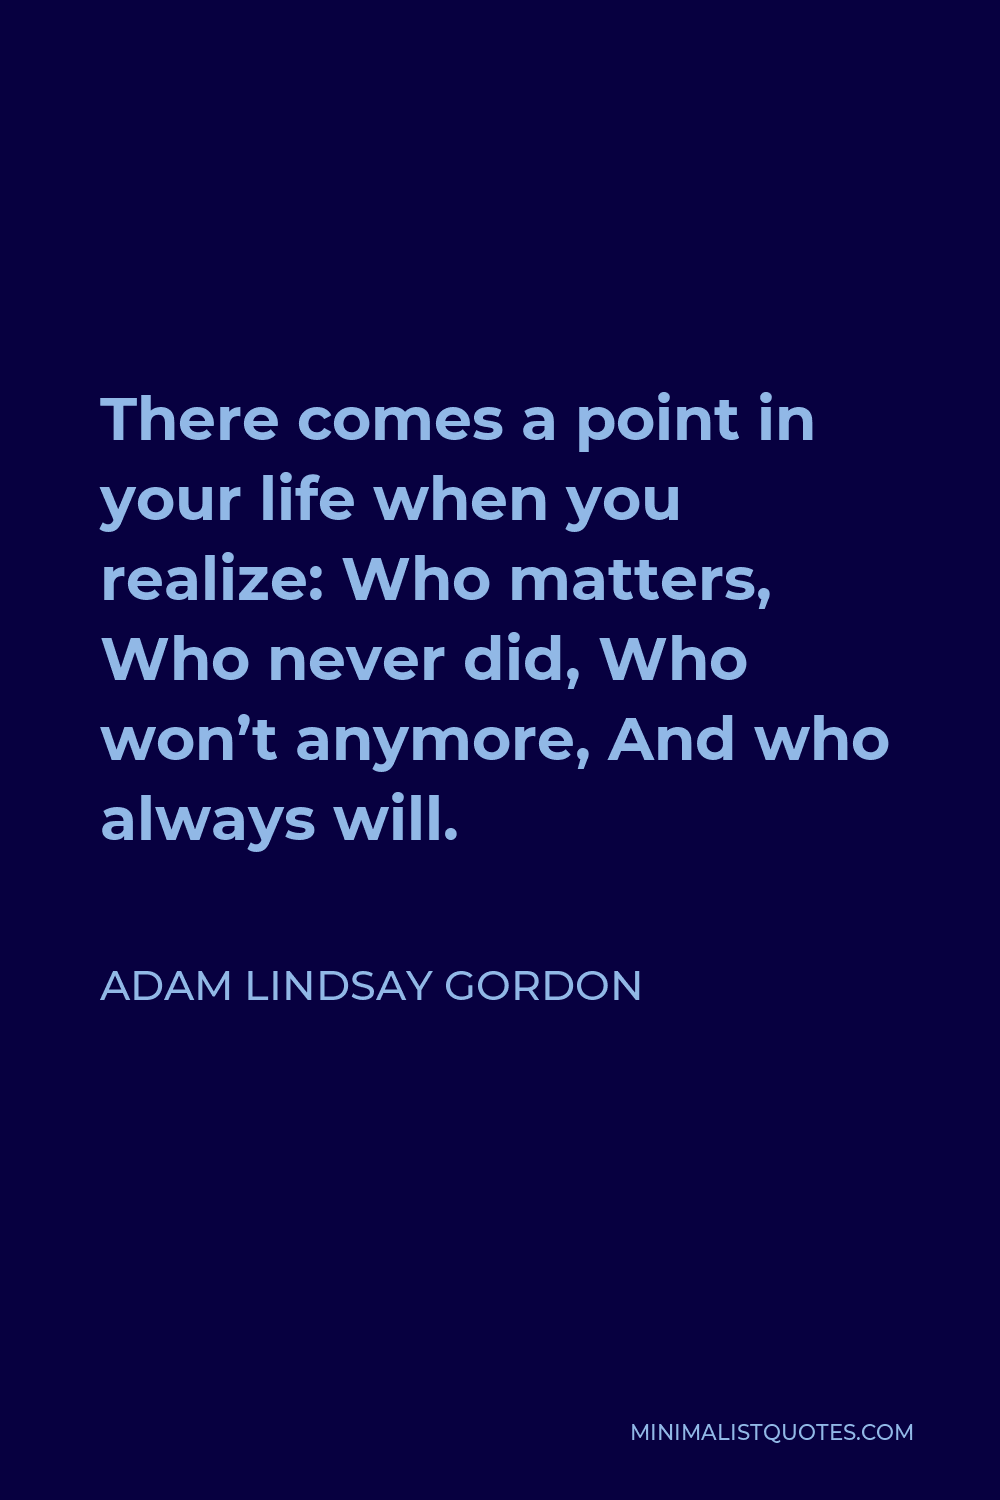 Adam Lindsay Gordon Quote - There comes a point in your life when you realize: Who matters, Who never did, Who won’t anymore, And who always will.